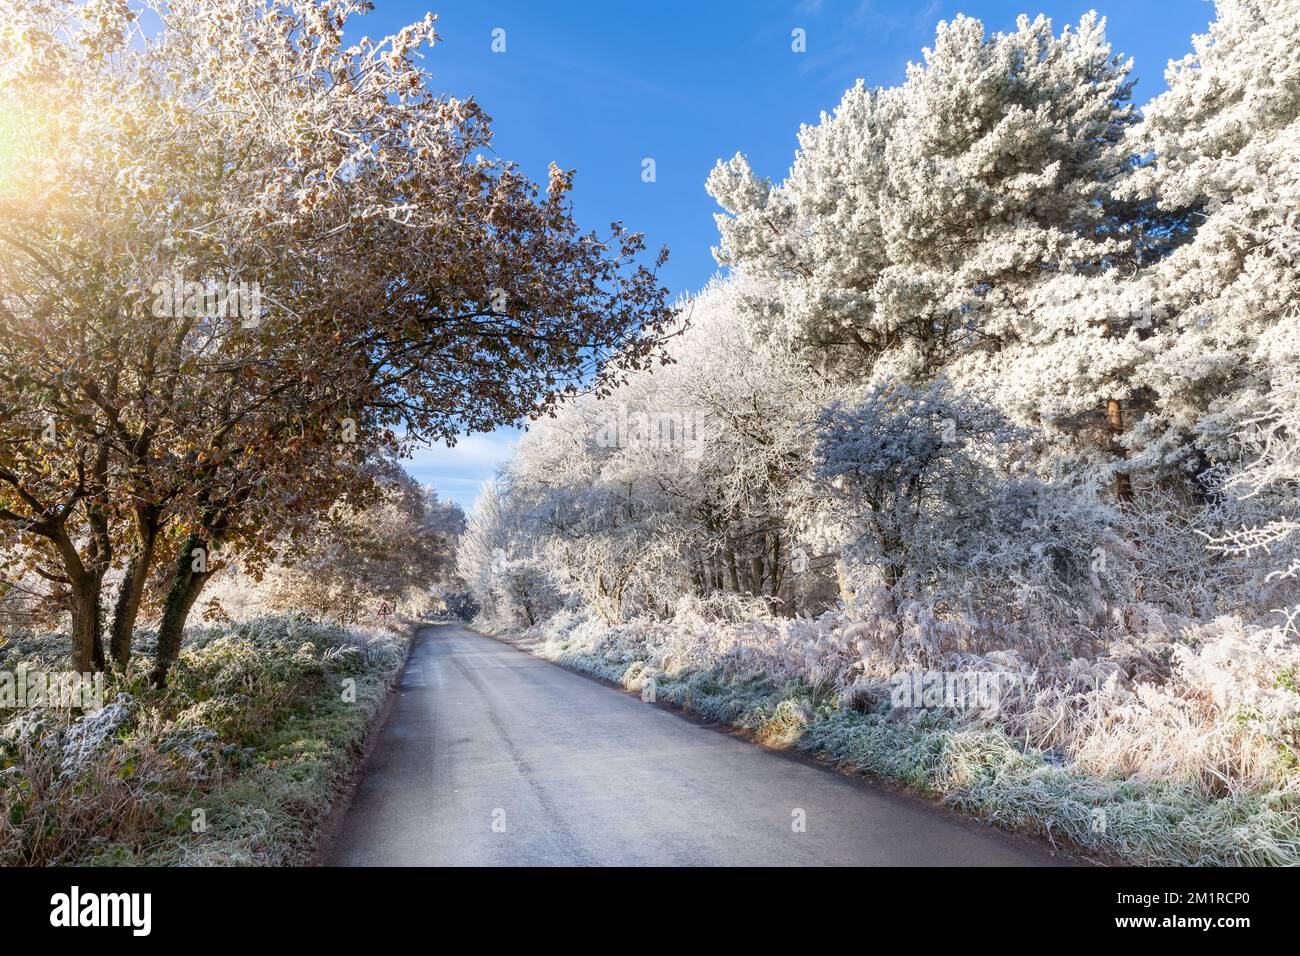 Winter tree frost on UK rural roads. Icy weather with clear blue skies in December Stock Photo